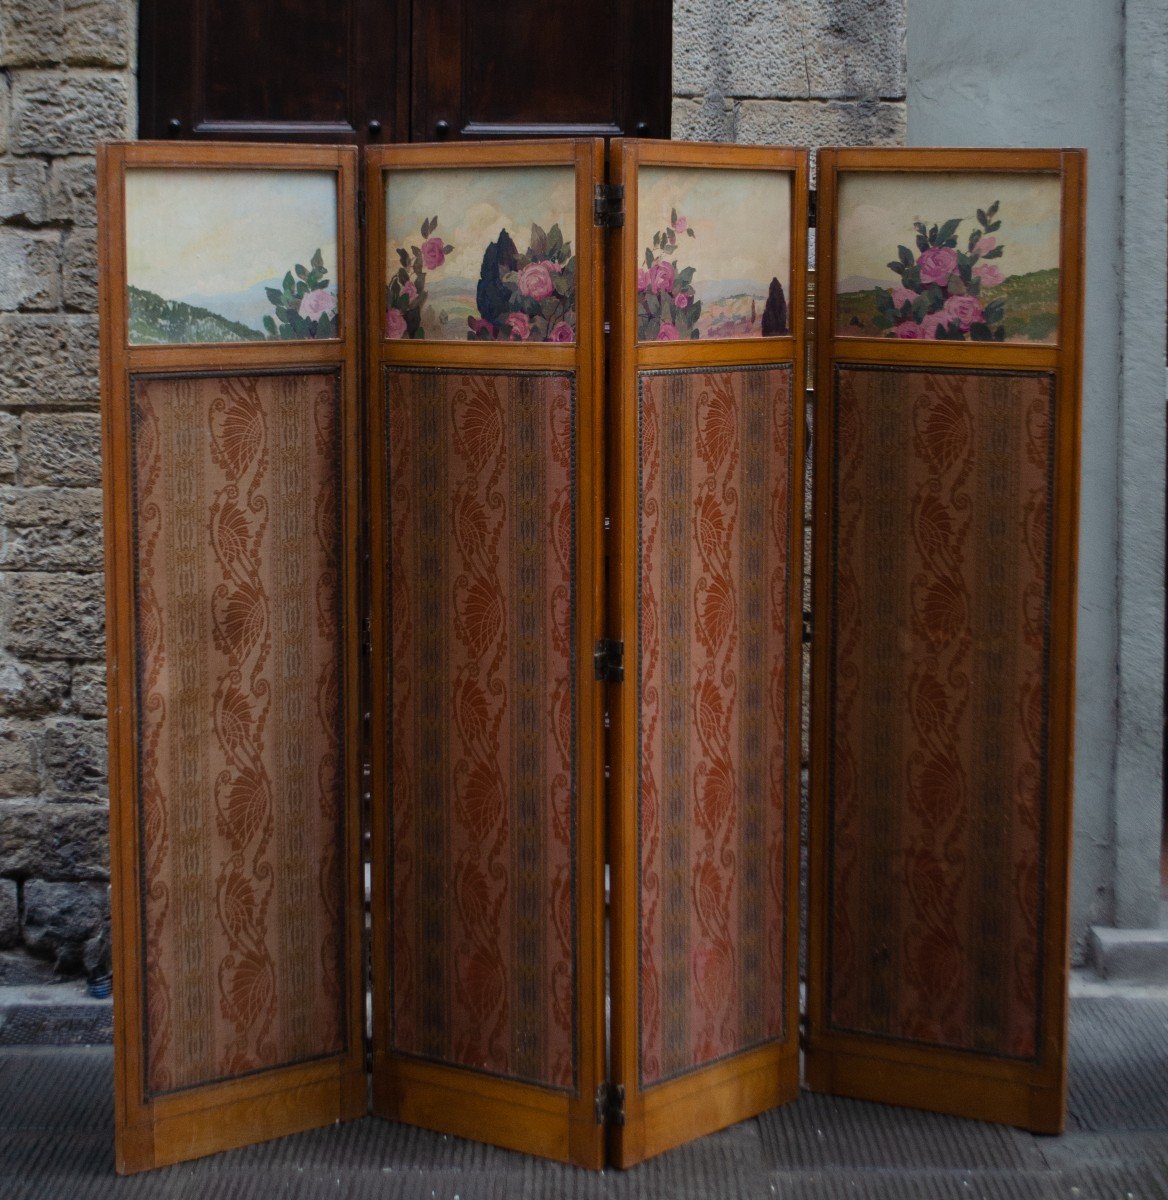 Screen With Fabric Panels Decorated With Paintings